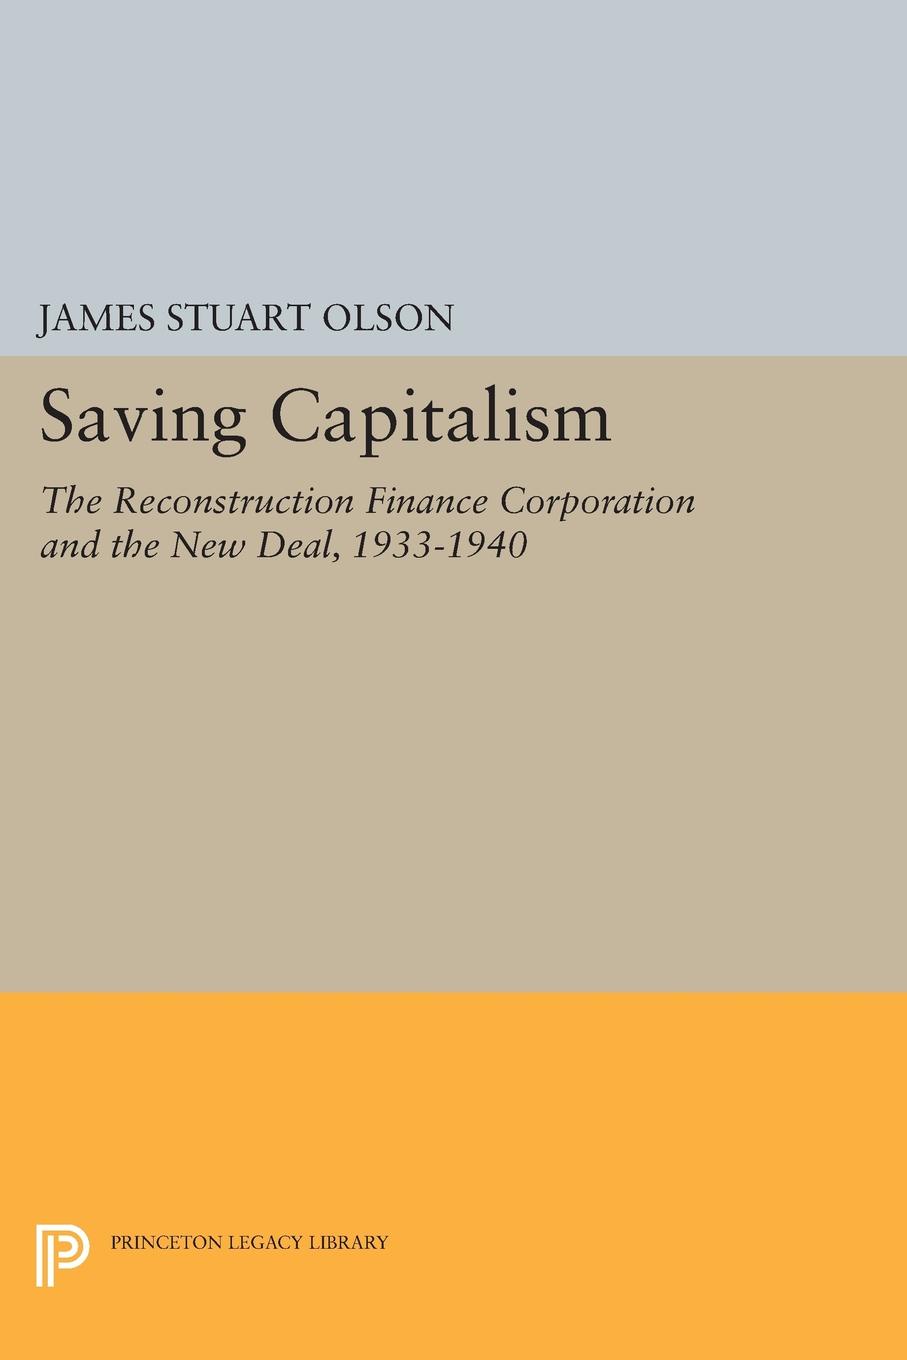 Saving Capitalism. The Reconstruction Finance Corporation and the New Deal, 1933-1940